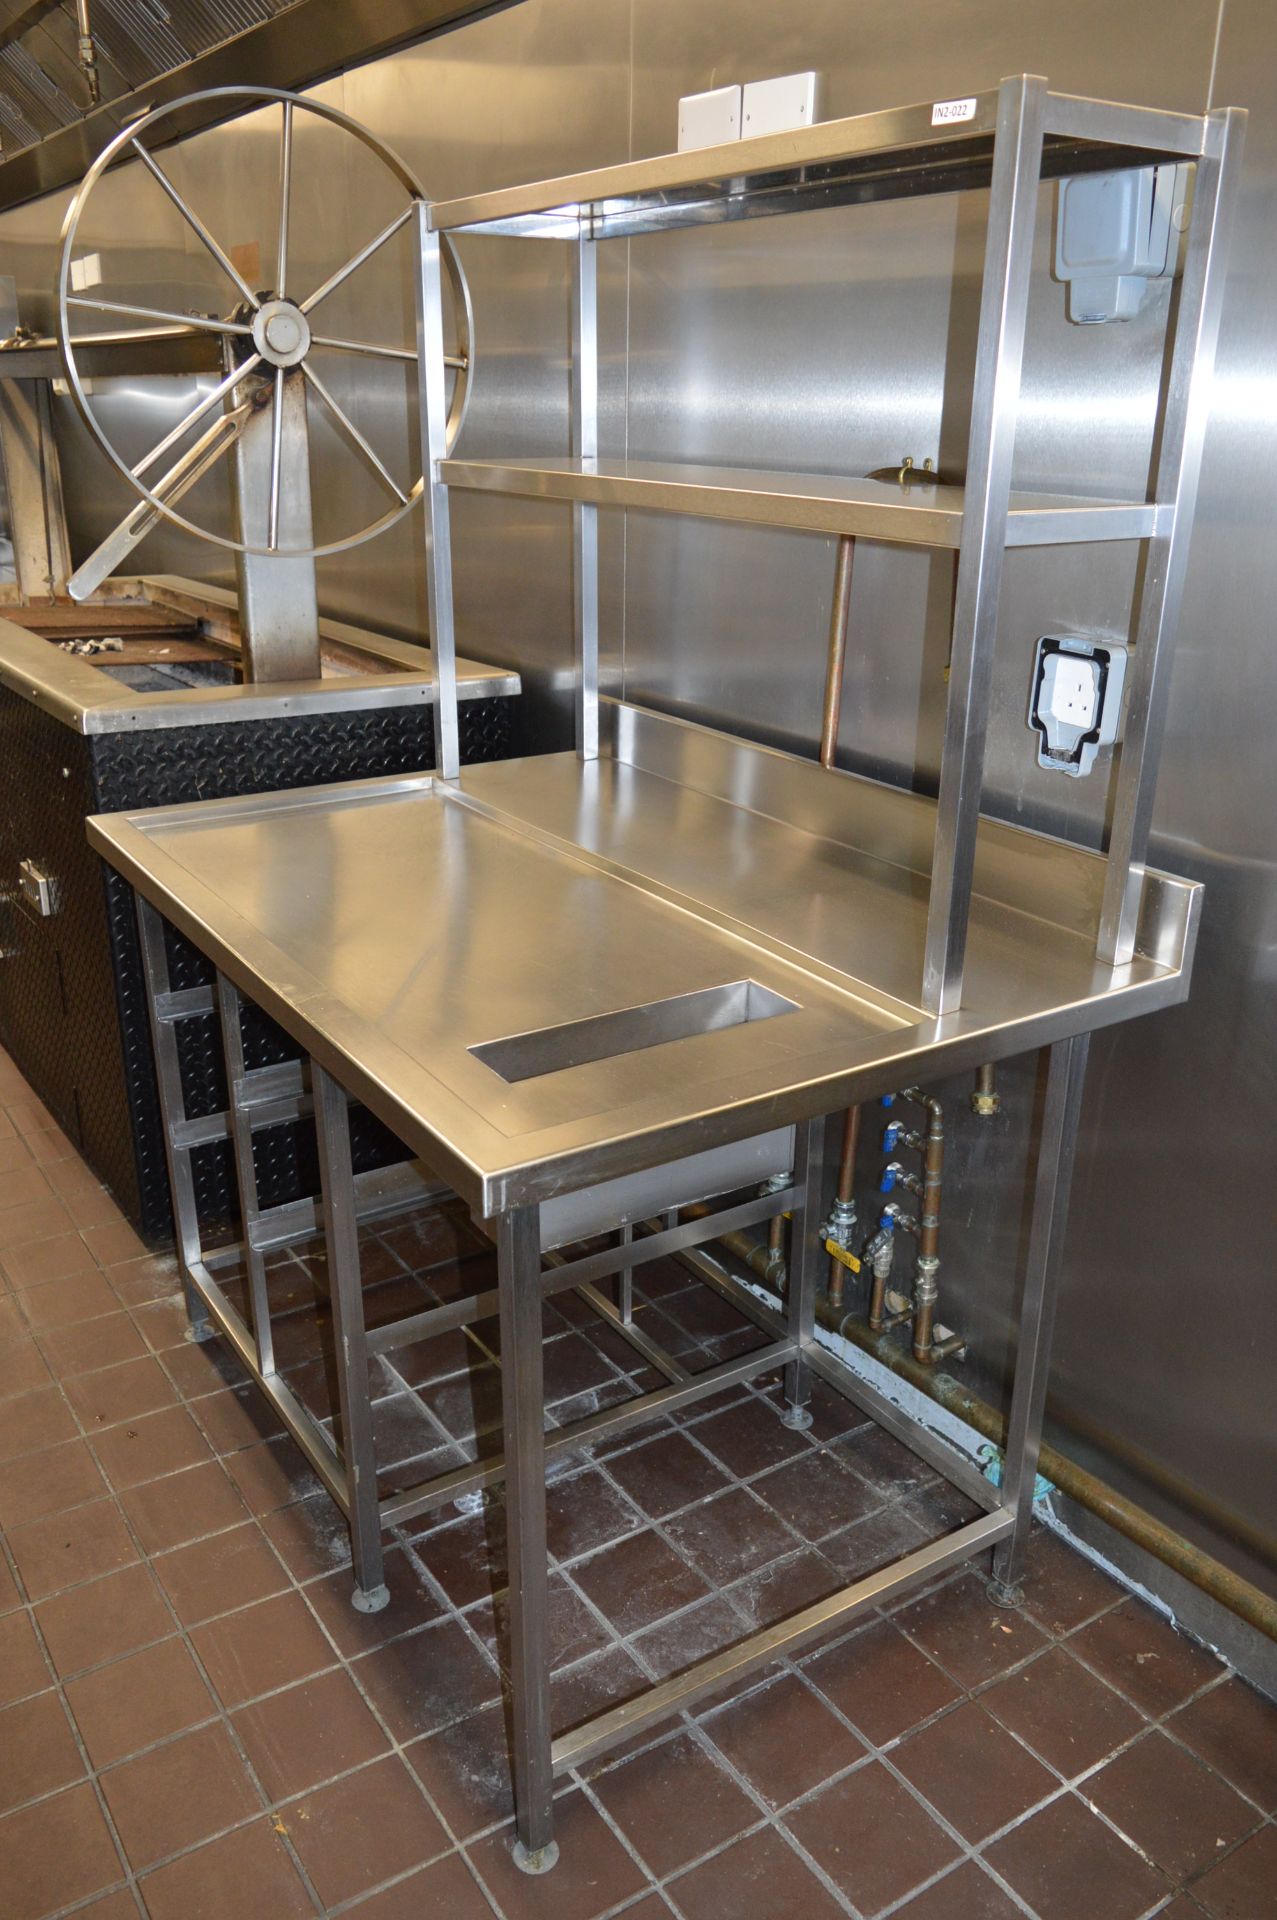 1 x Stainless Steel Prep Bench With Undercounter Shelves, Bin Chute and Overhead Shelves - H87/171 x - Image 2 of 7